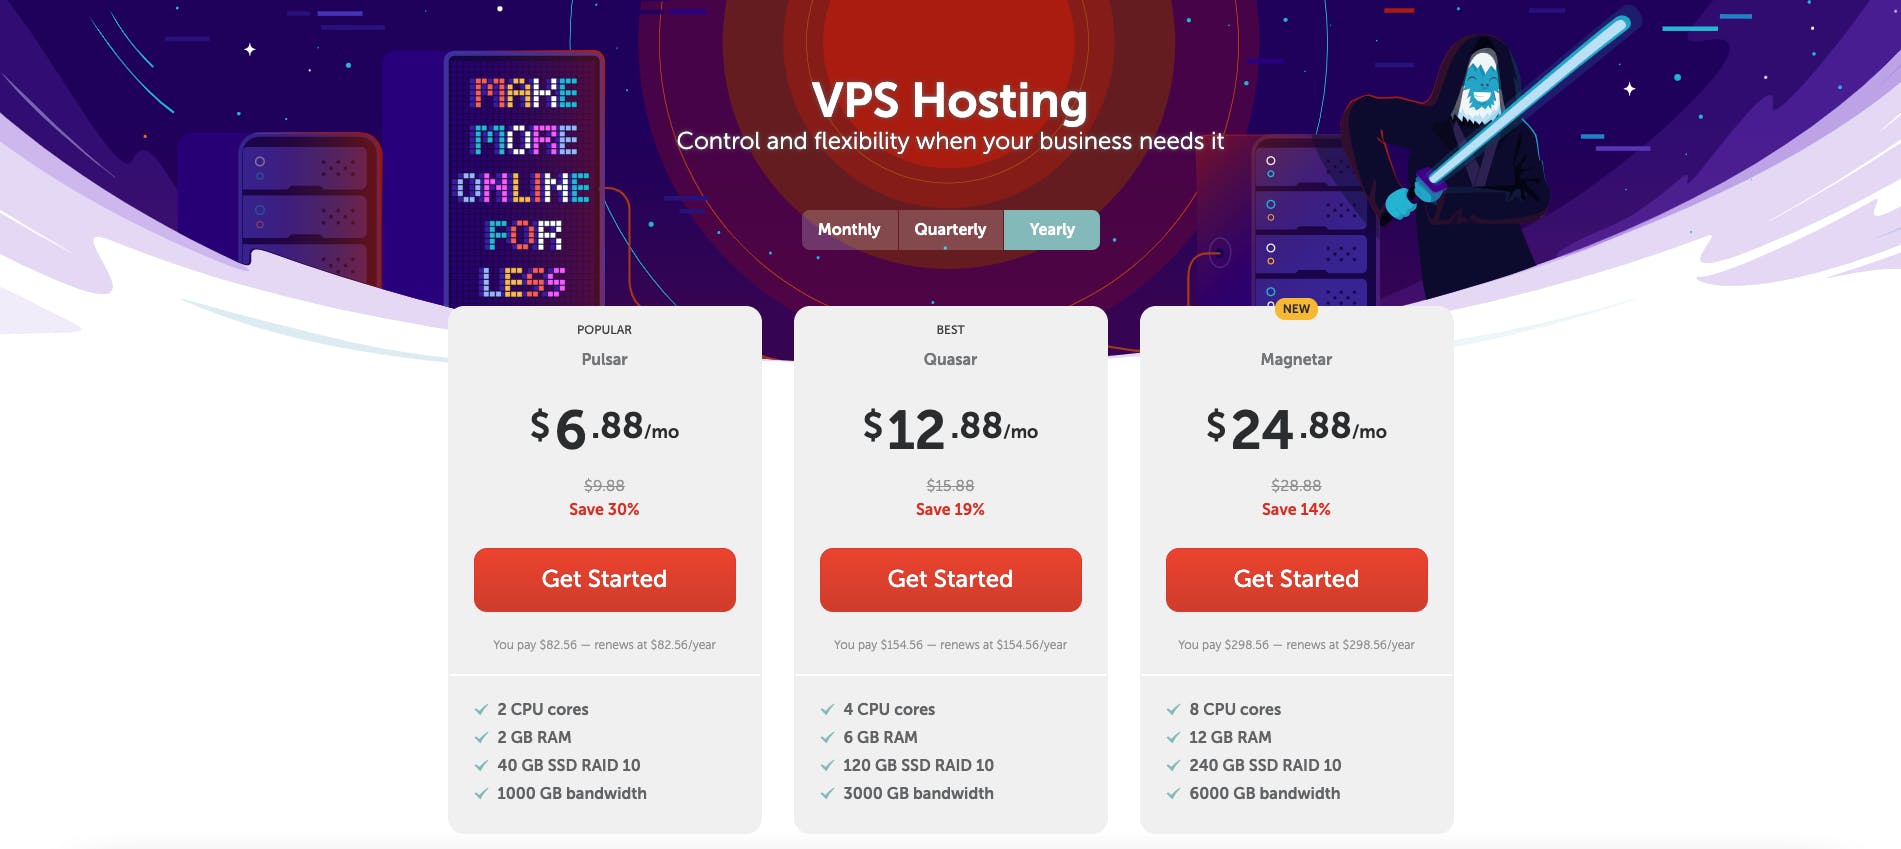 Comparison of Various VPS Hosting Plans Offering Different Features and Pricing